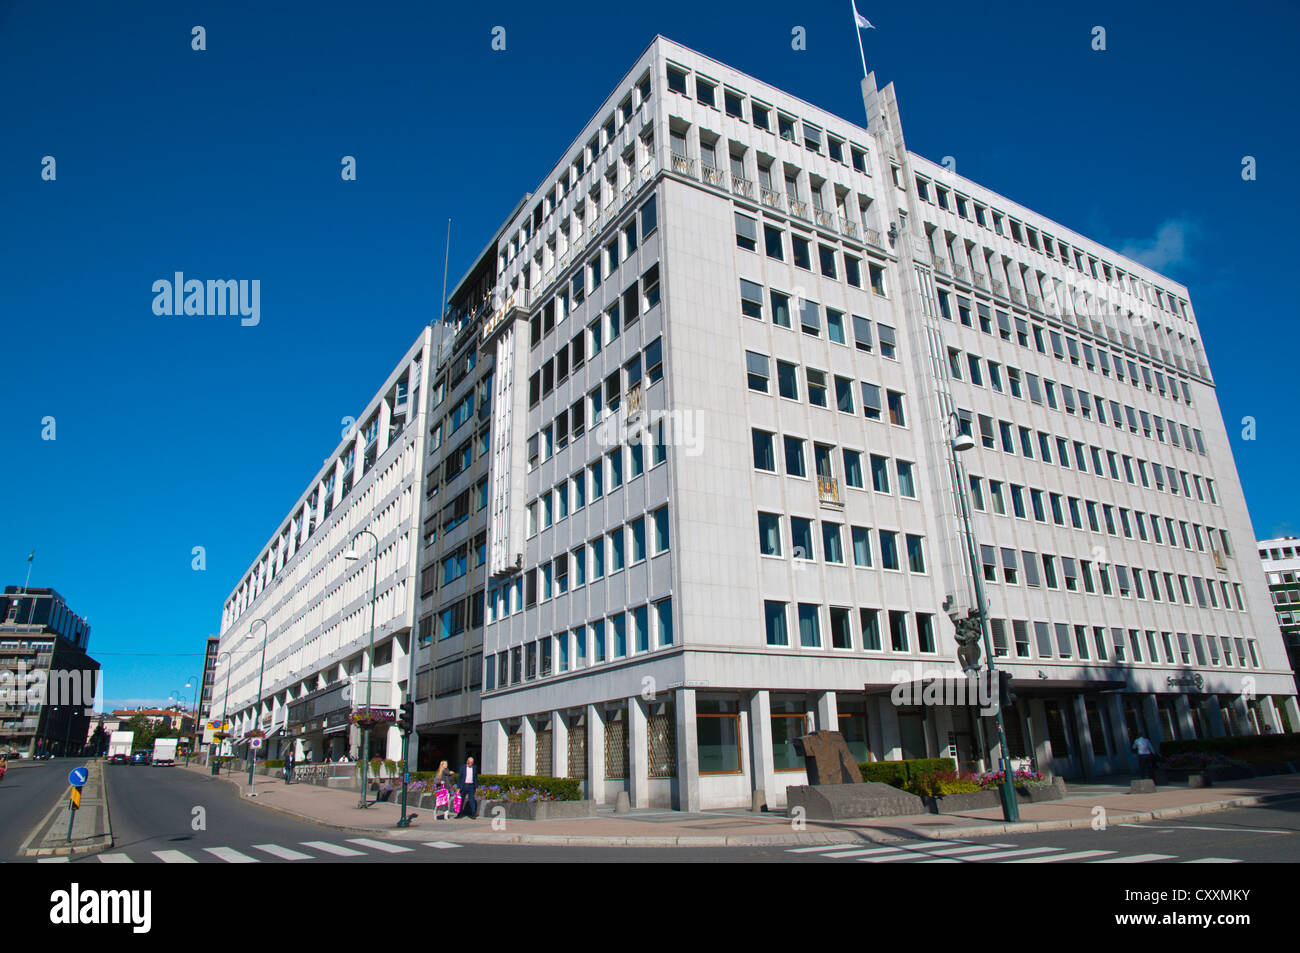 Office buildings along Dronning Mauds gate street Vika district Sentrum central Oslo Norway Europe Stock Photo